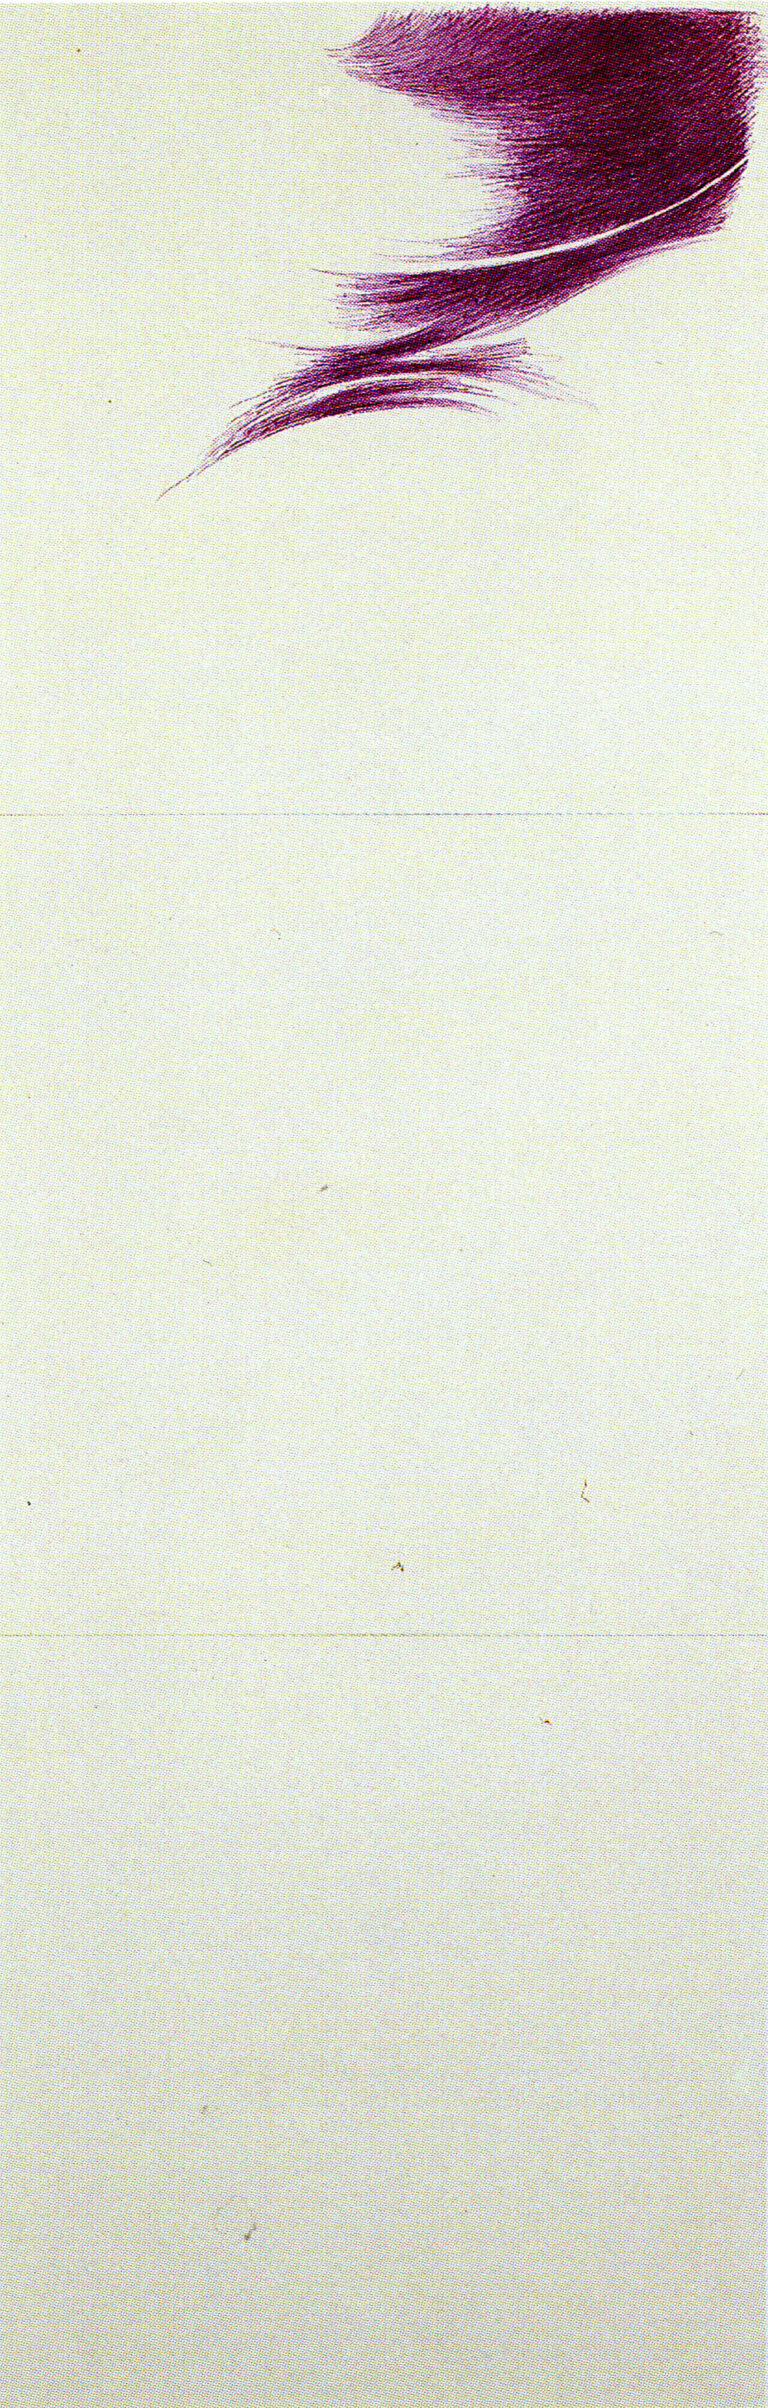 1989 - Ball-pen on canvas-backed paper - cm 103,5x34,5